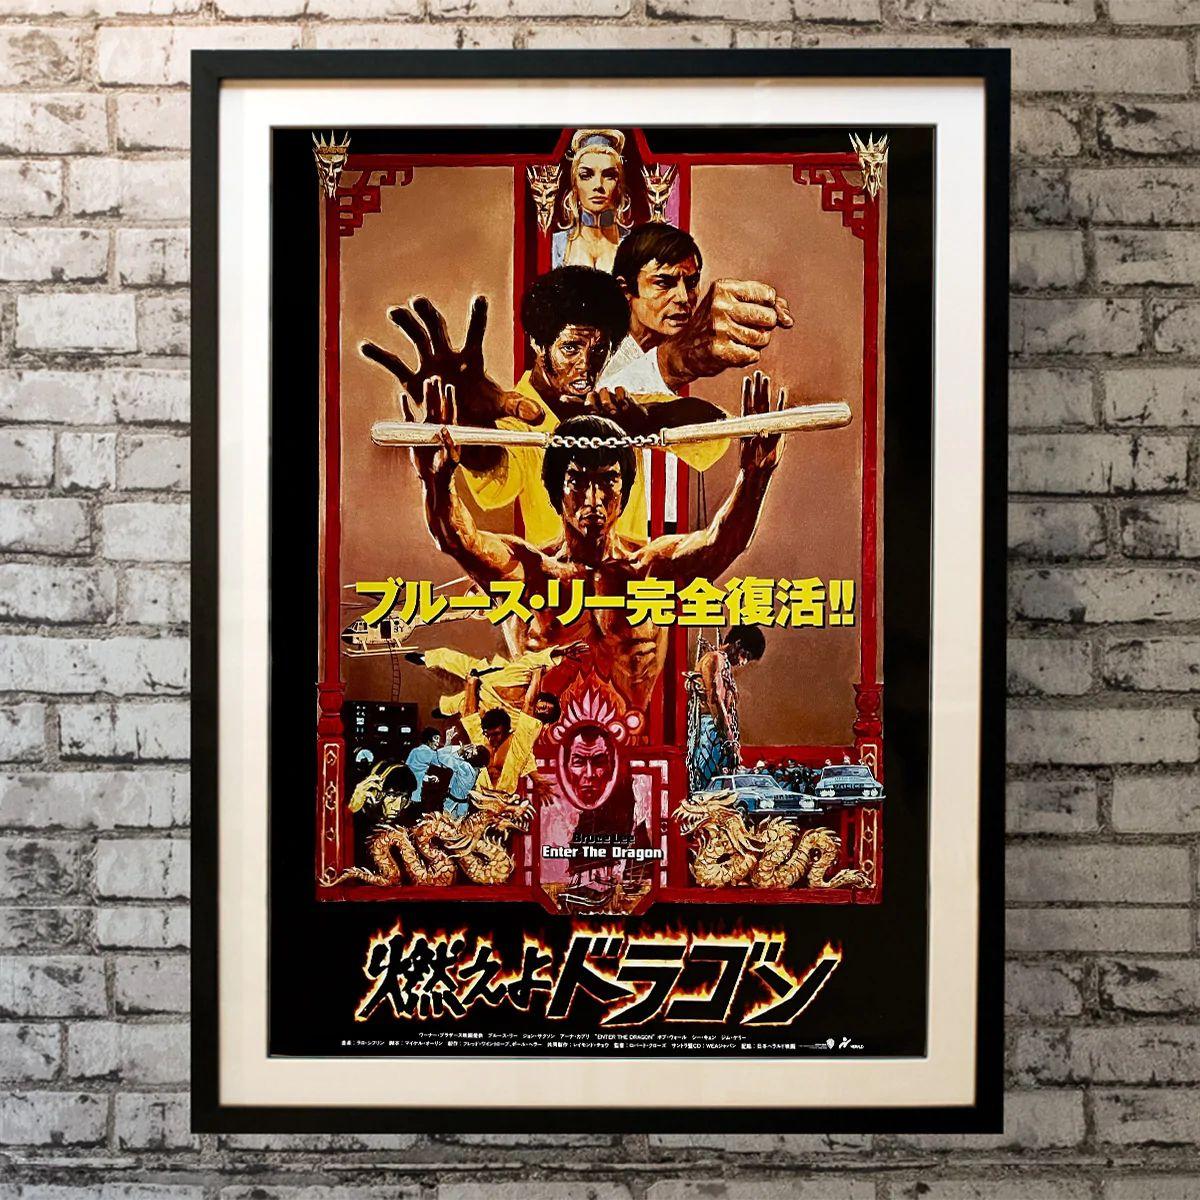 Enter The Dragon, Unframed Poster, 1997R

Original B1 (29 X 41 Inches). A secret agent comes to an opium lord's island fortress with other fighters for a martial-arts tournament.

Year: 1997 Re-release
Nationality: Japanese
Condition: